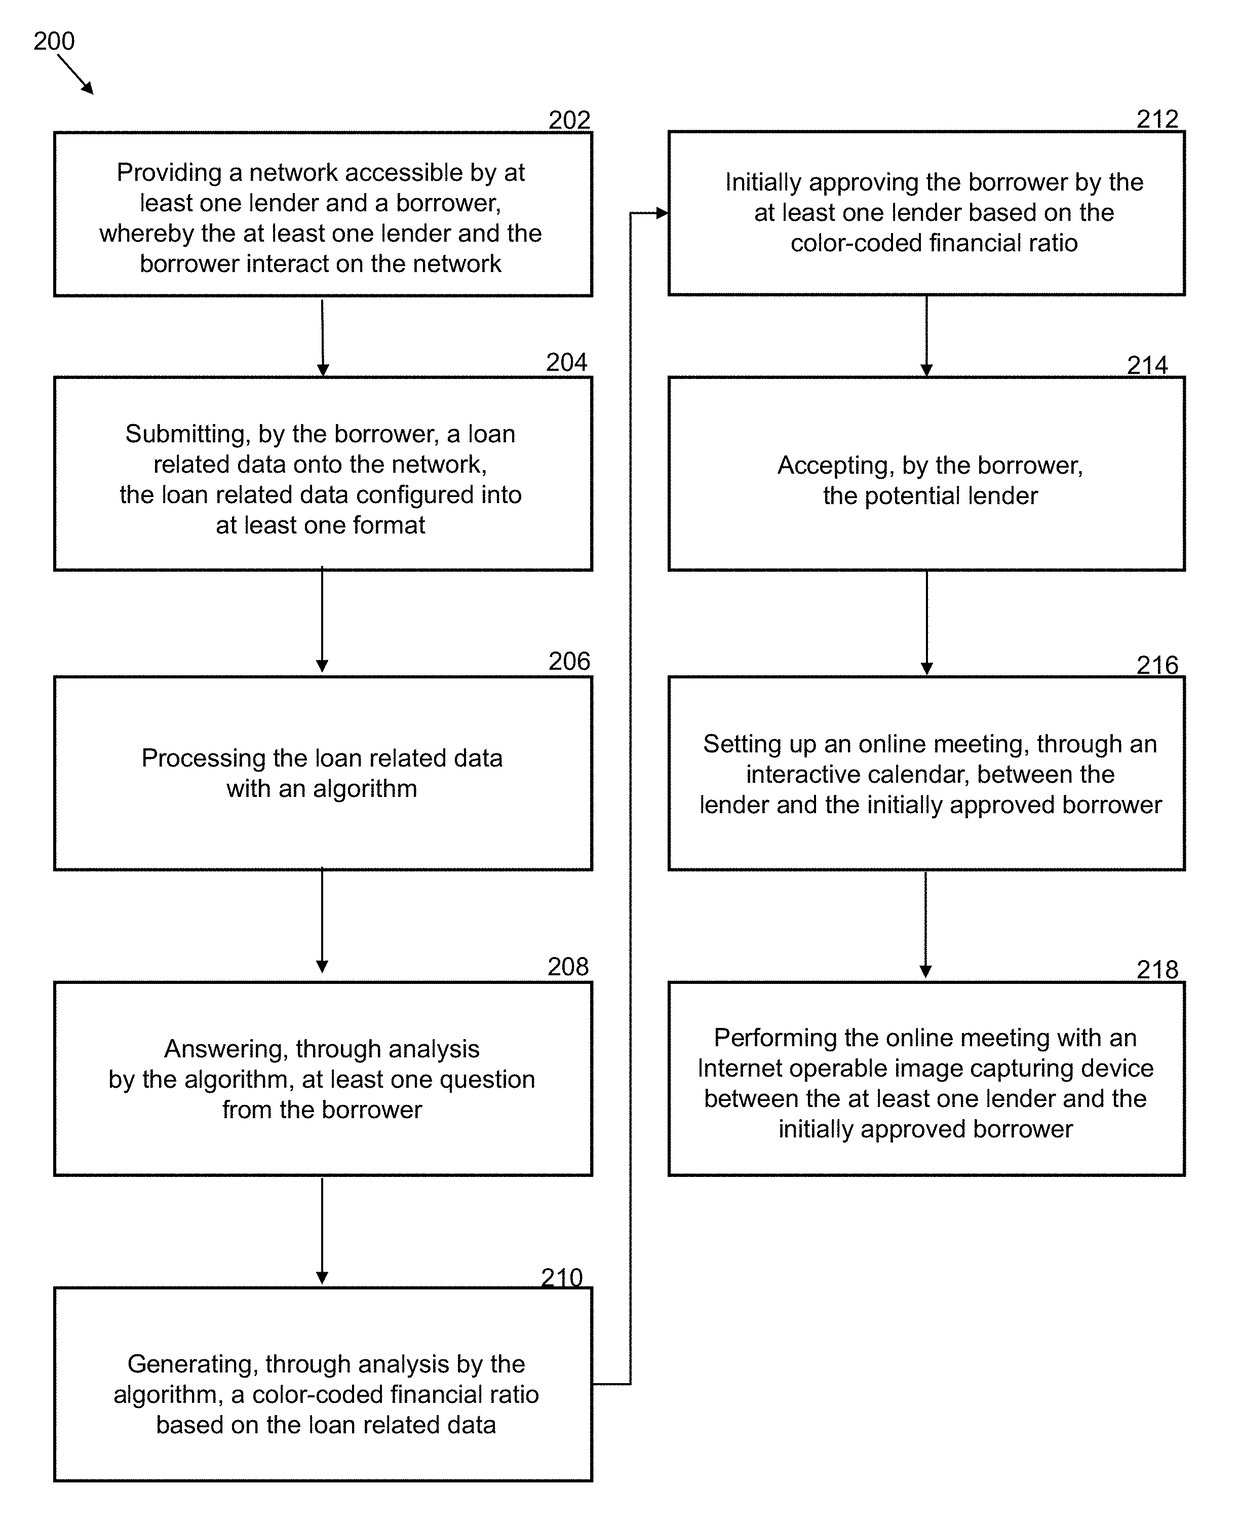 System and Method for Matching Lender with Borrower based on Color-Coded Financial Ratios and through an Online Meeting